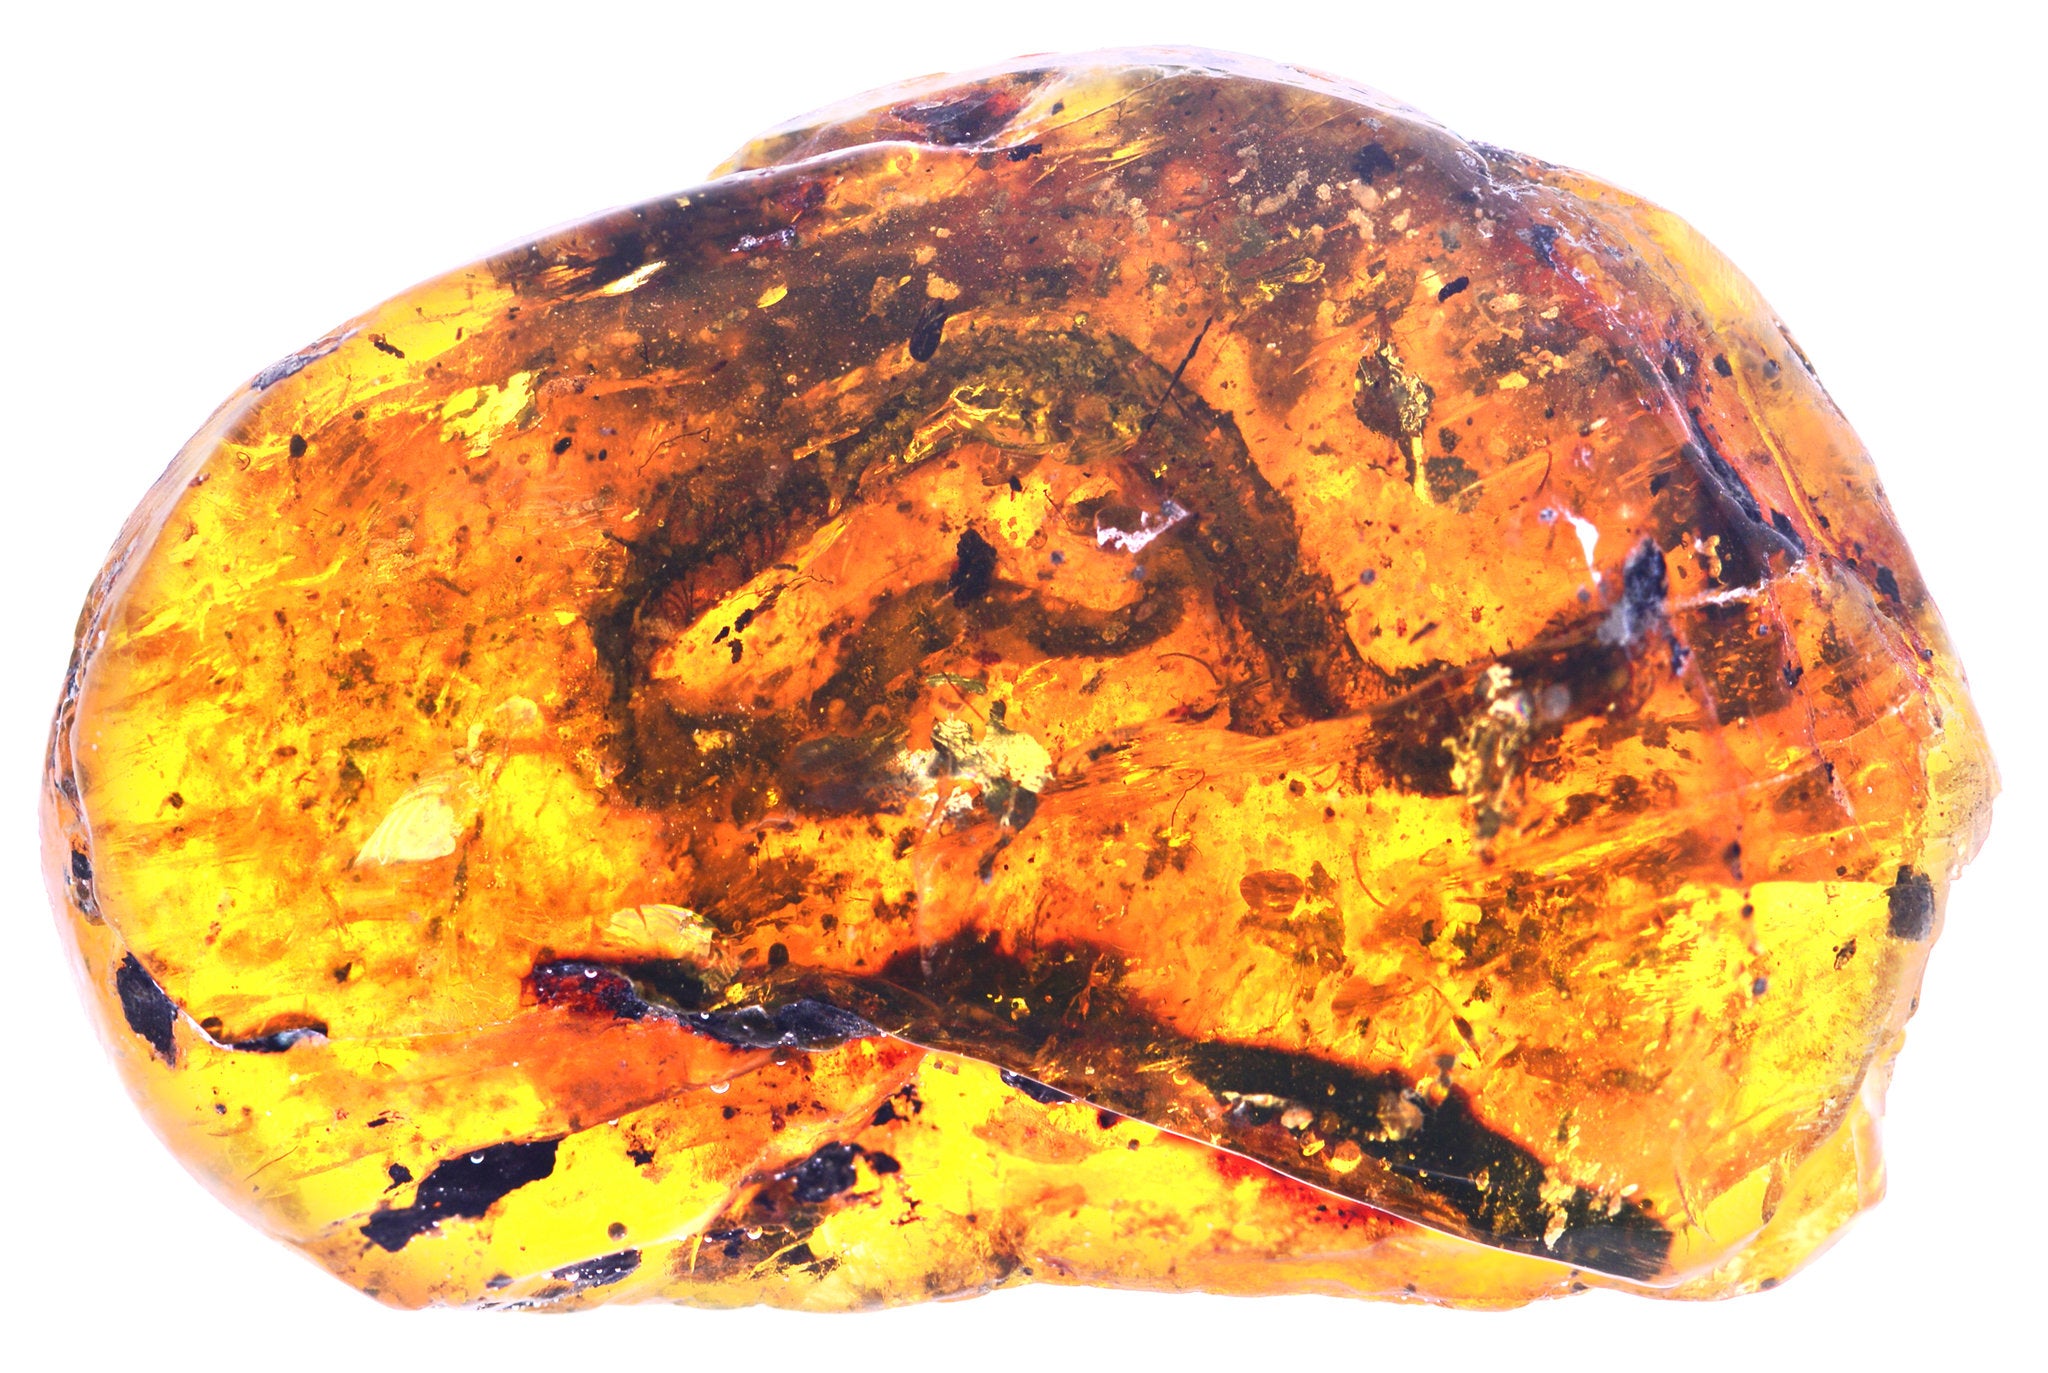 Amber Stone Meaning: Healing Properties, Uses, & Benefits